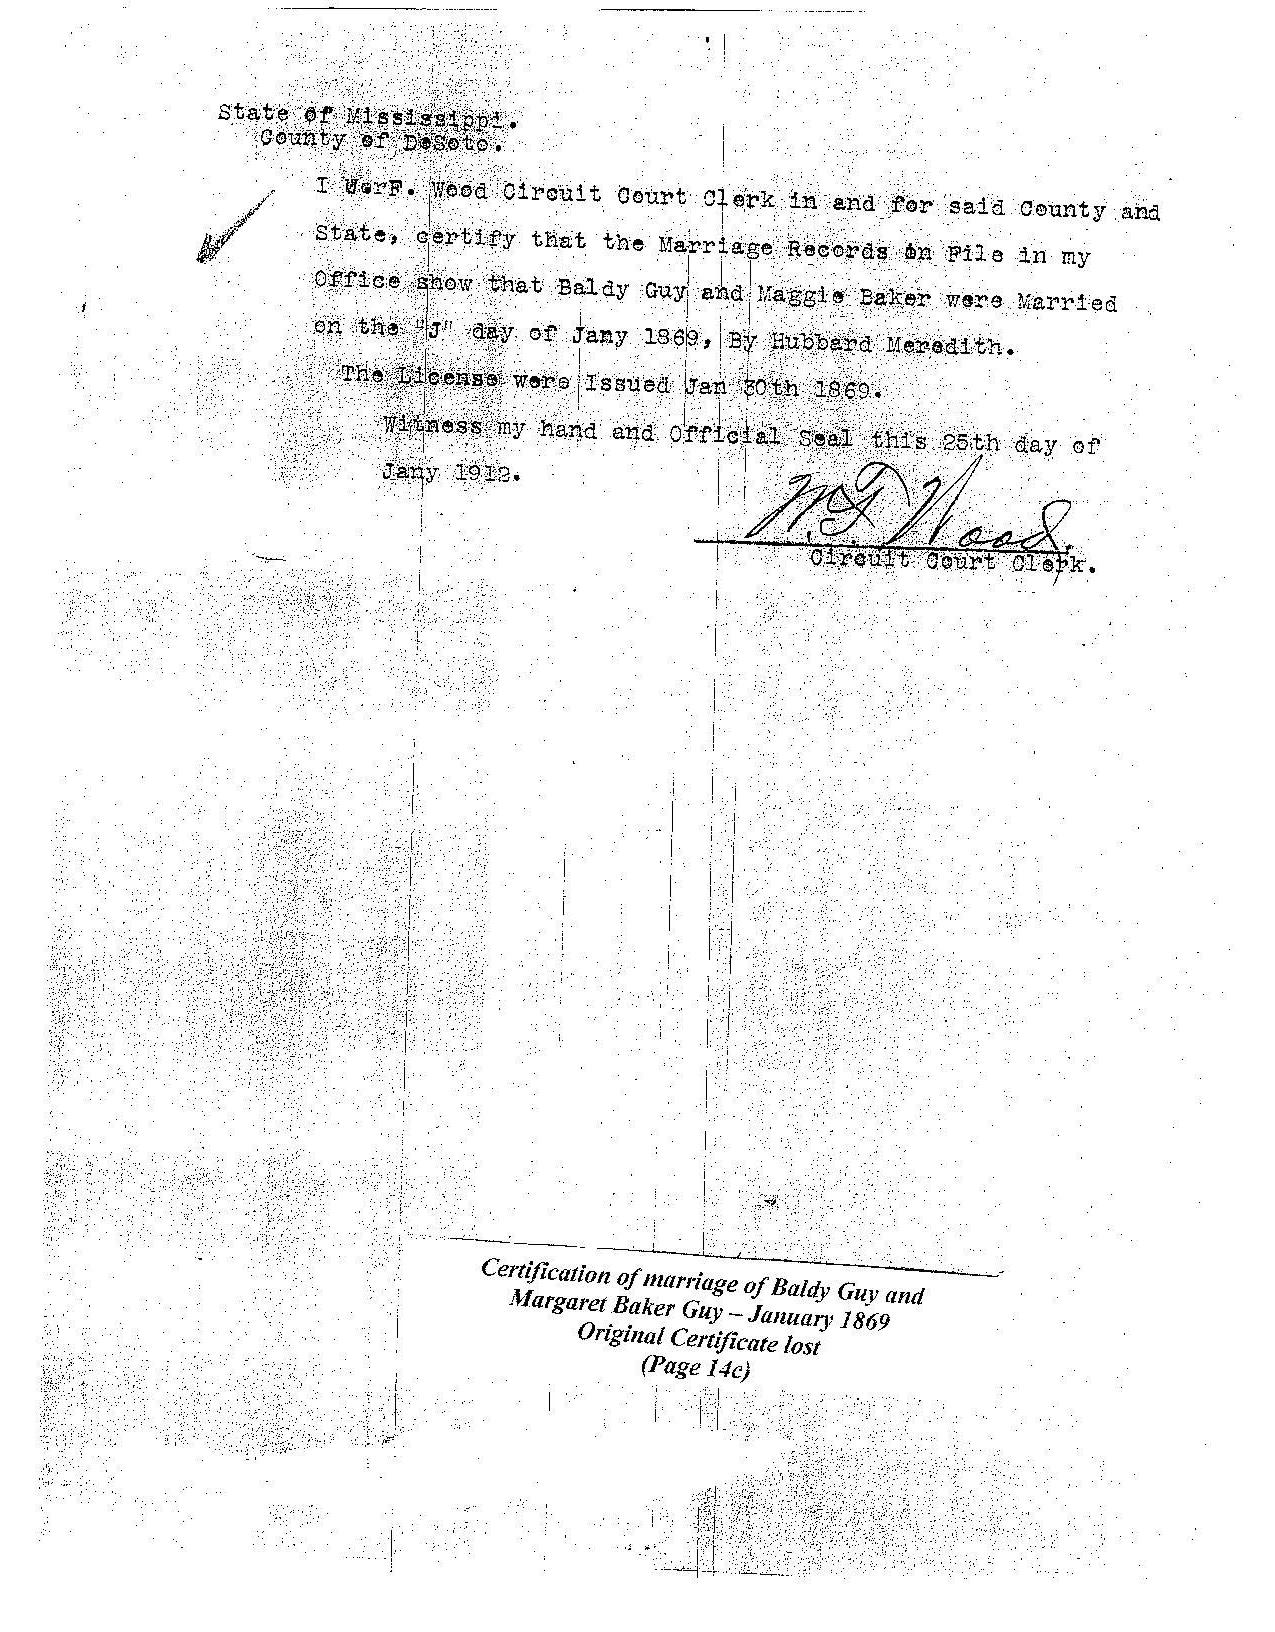 Certification of marriage of Baldy Guy and Margaret Baker-Guy January 30, 1869 